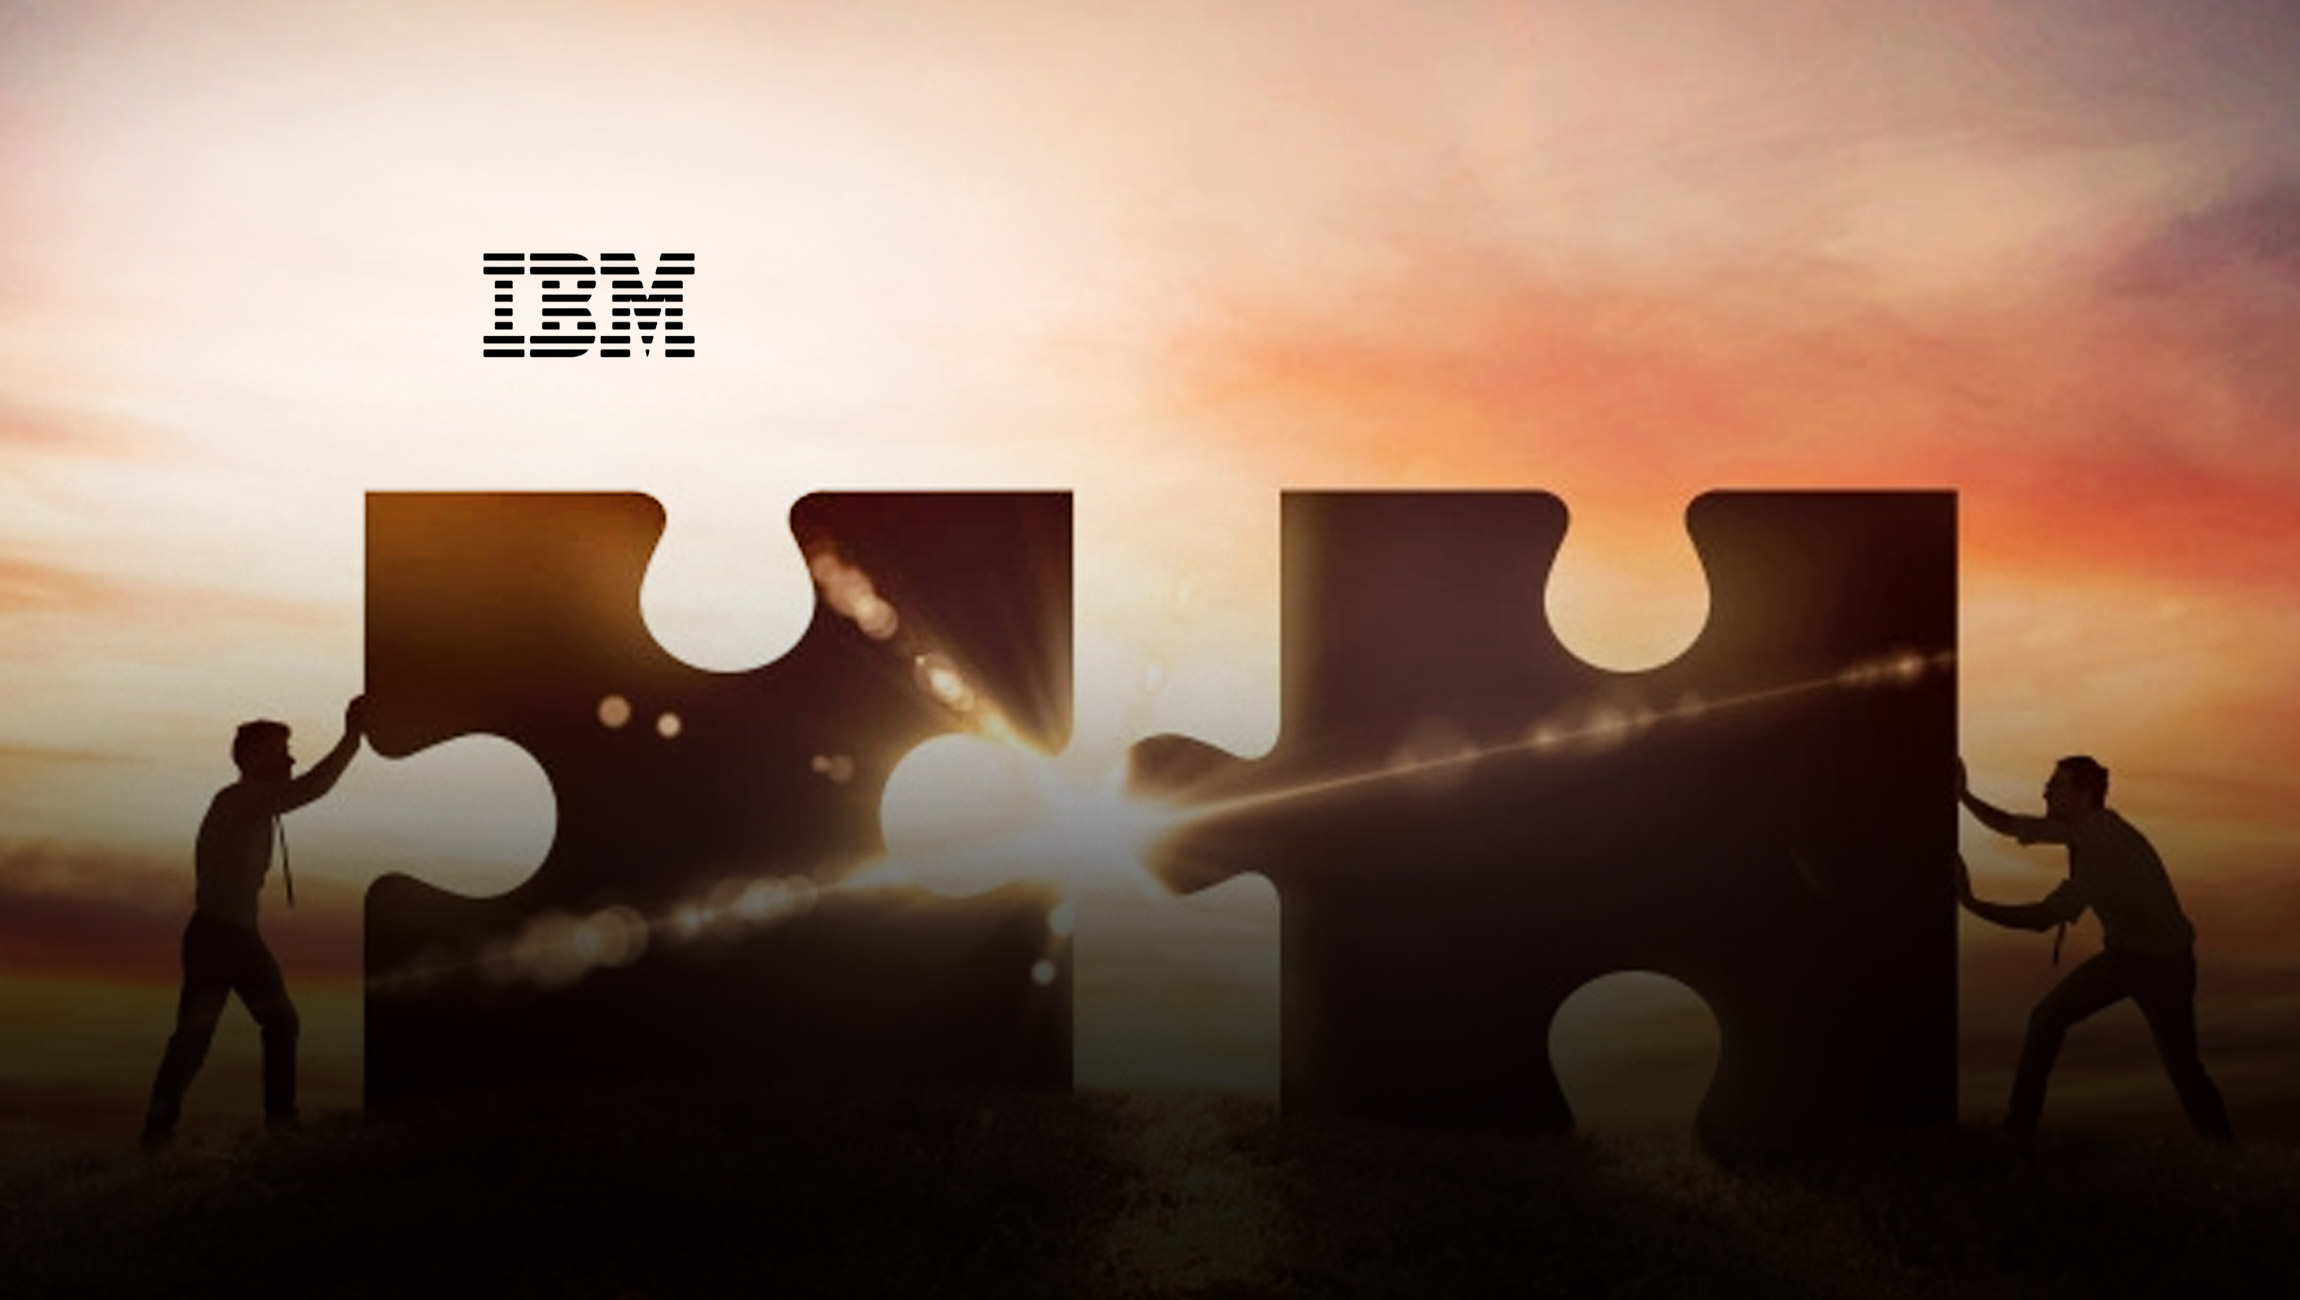 IBM Collaborates with SAP To Develop New AI Solutions for the Consumer Packaged Goods and Retail Industries